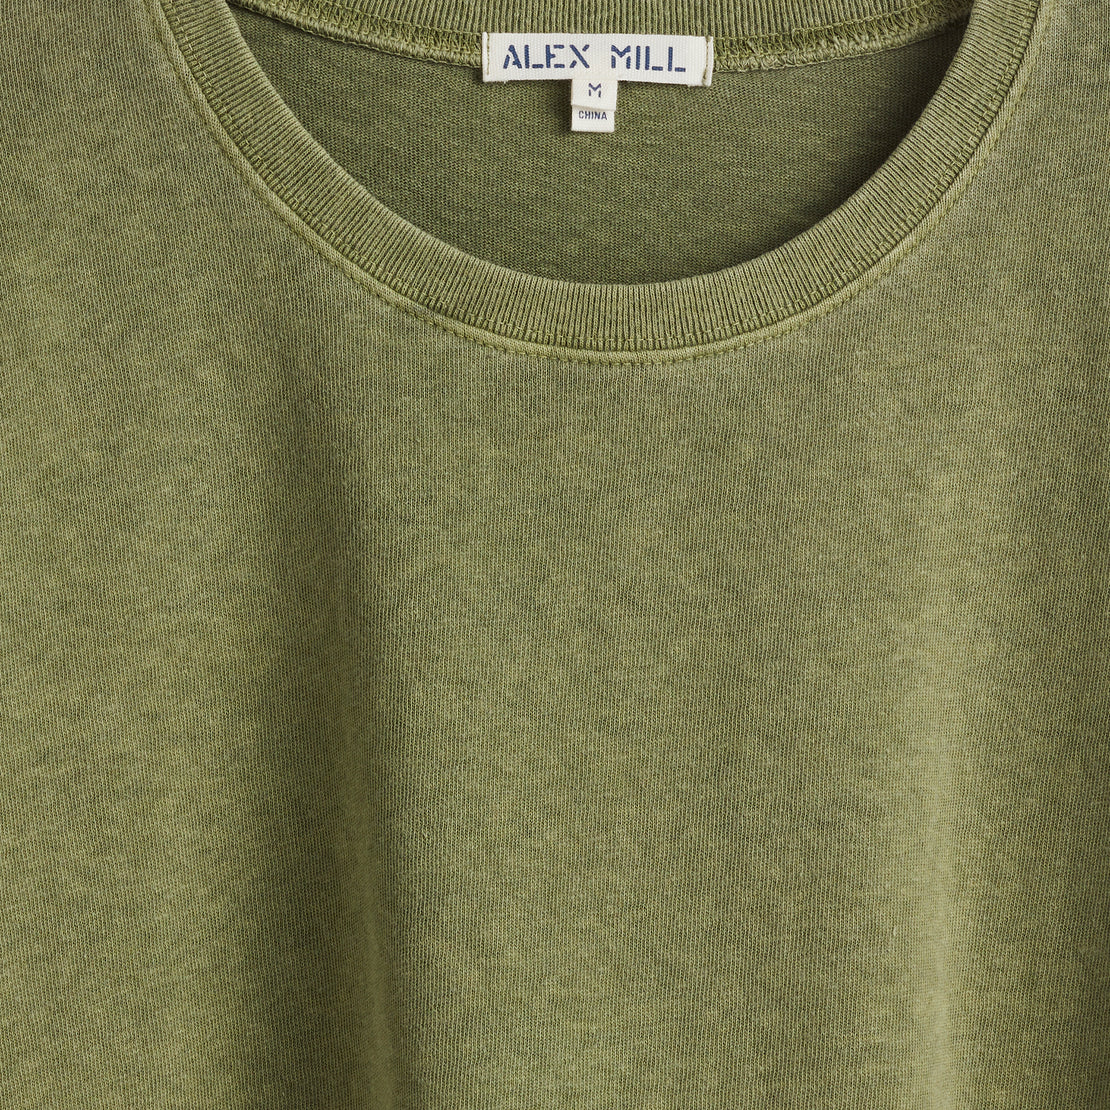 Vintage Wash Crew Neck Tee - Army Olive - Alex Mill - STAG Provisions - W - Tops - S/S Tee